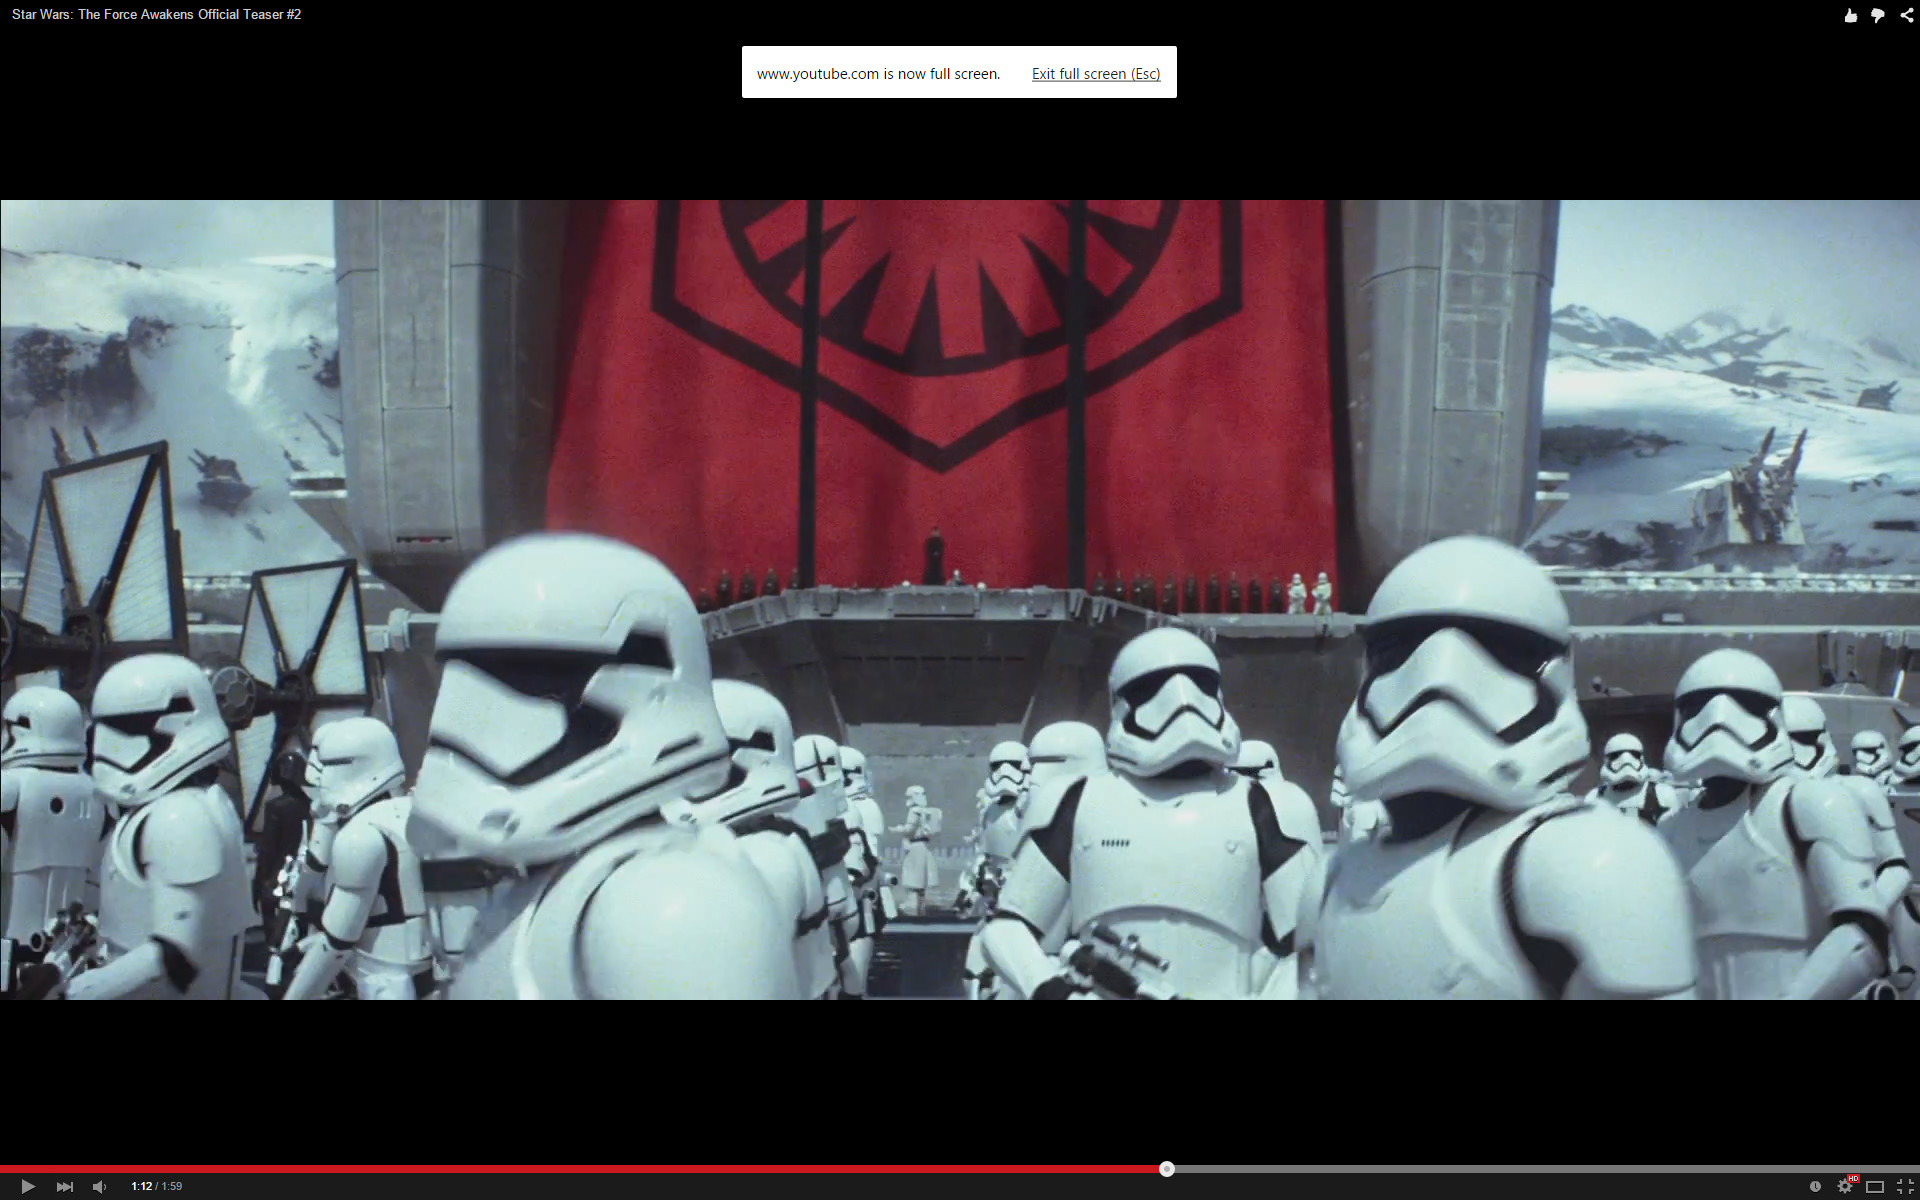 1920x1200 That emblem, those huge turrets in the background. Hell, those  stormtroopers look ready to tear shit up.